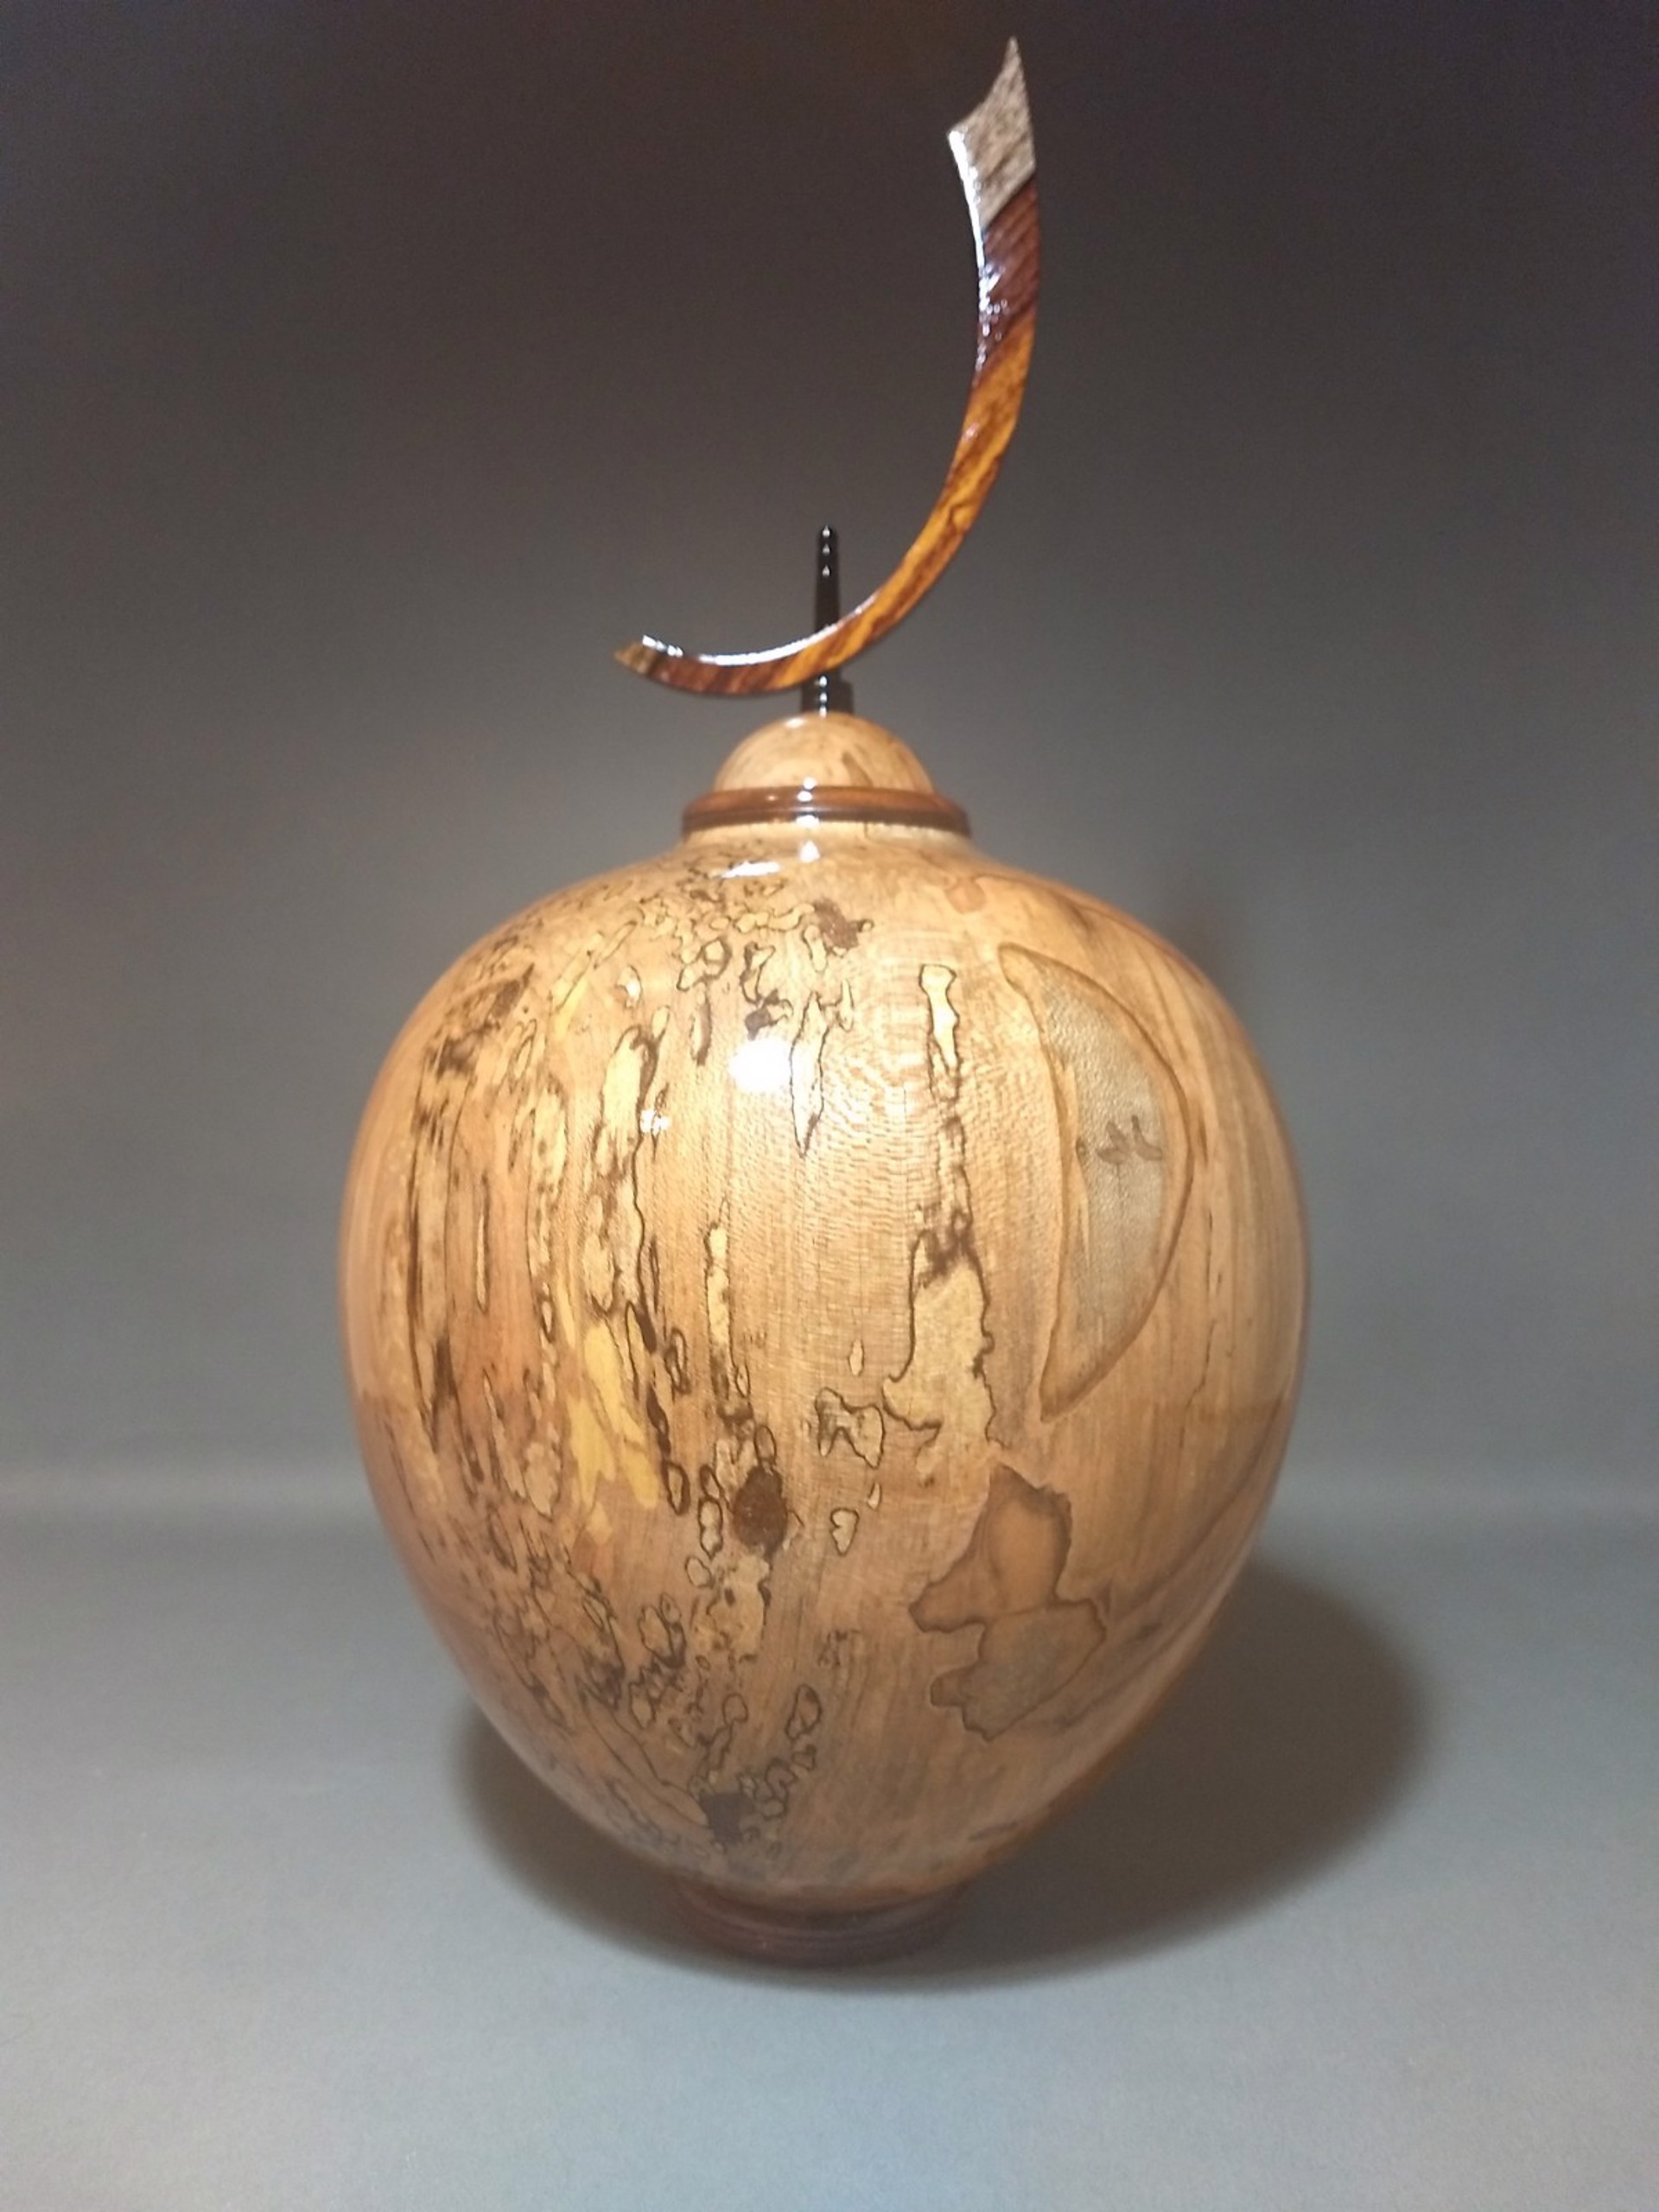 Spalted Maple Vessel by John Mascoll